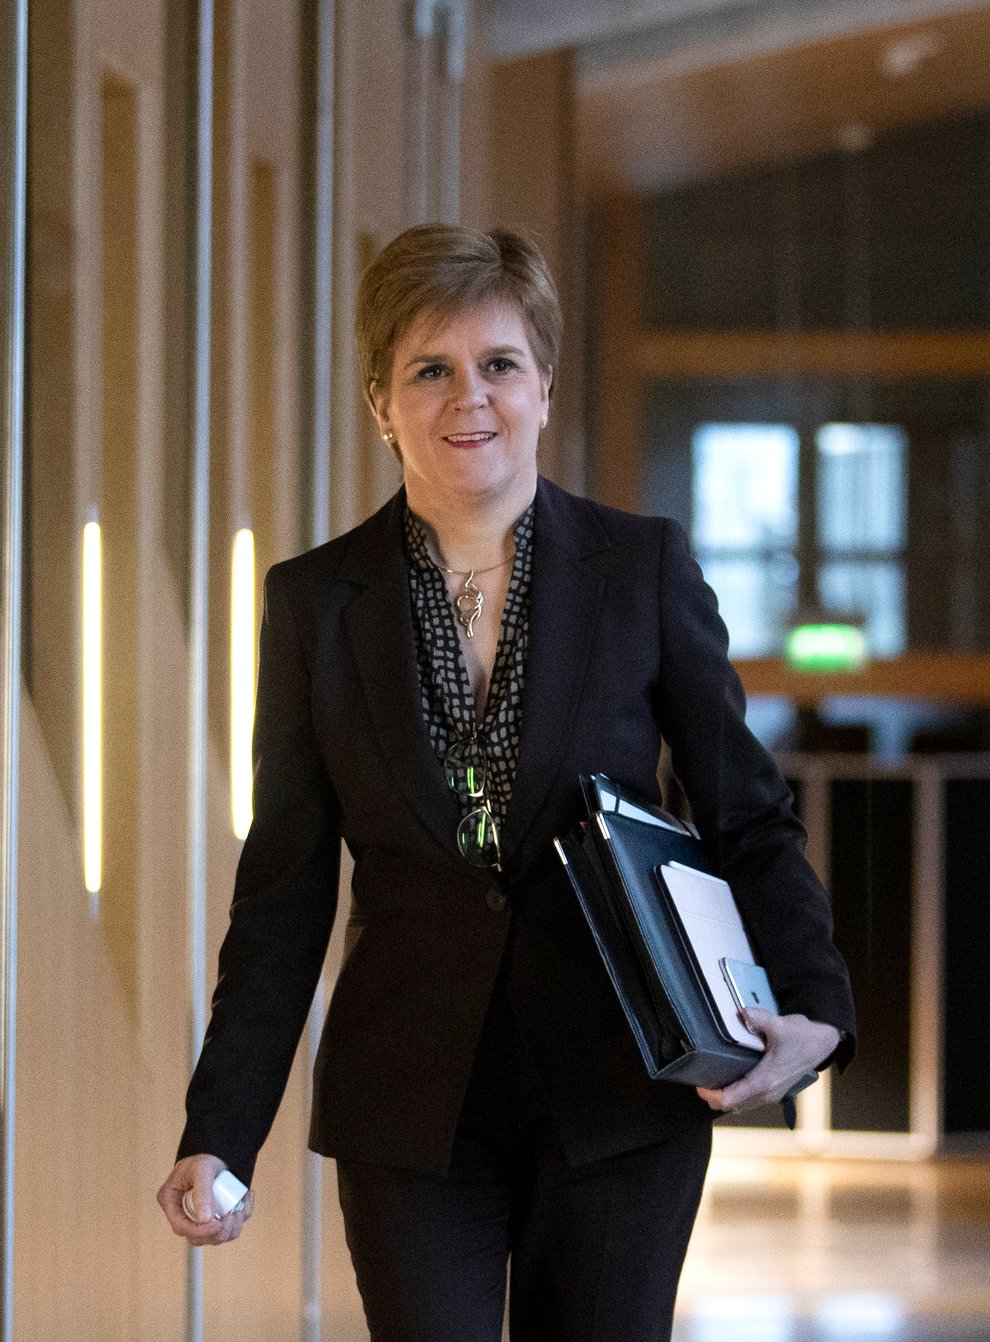 First Minister Nicola Sturgeon said there is no comparison between Scottish independence and the war in Ukraine after controversial comments by SNP president Mike Russell, right (Jane Barlow/PA)